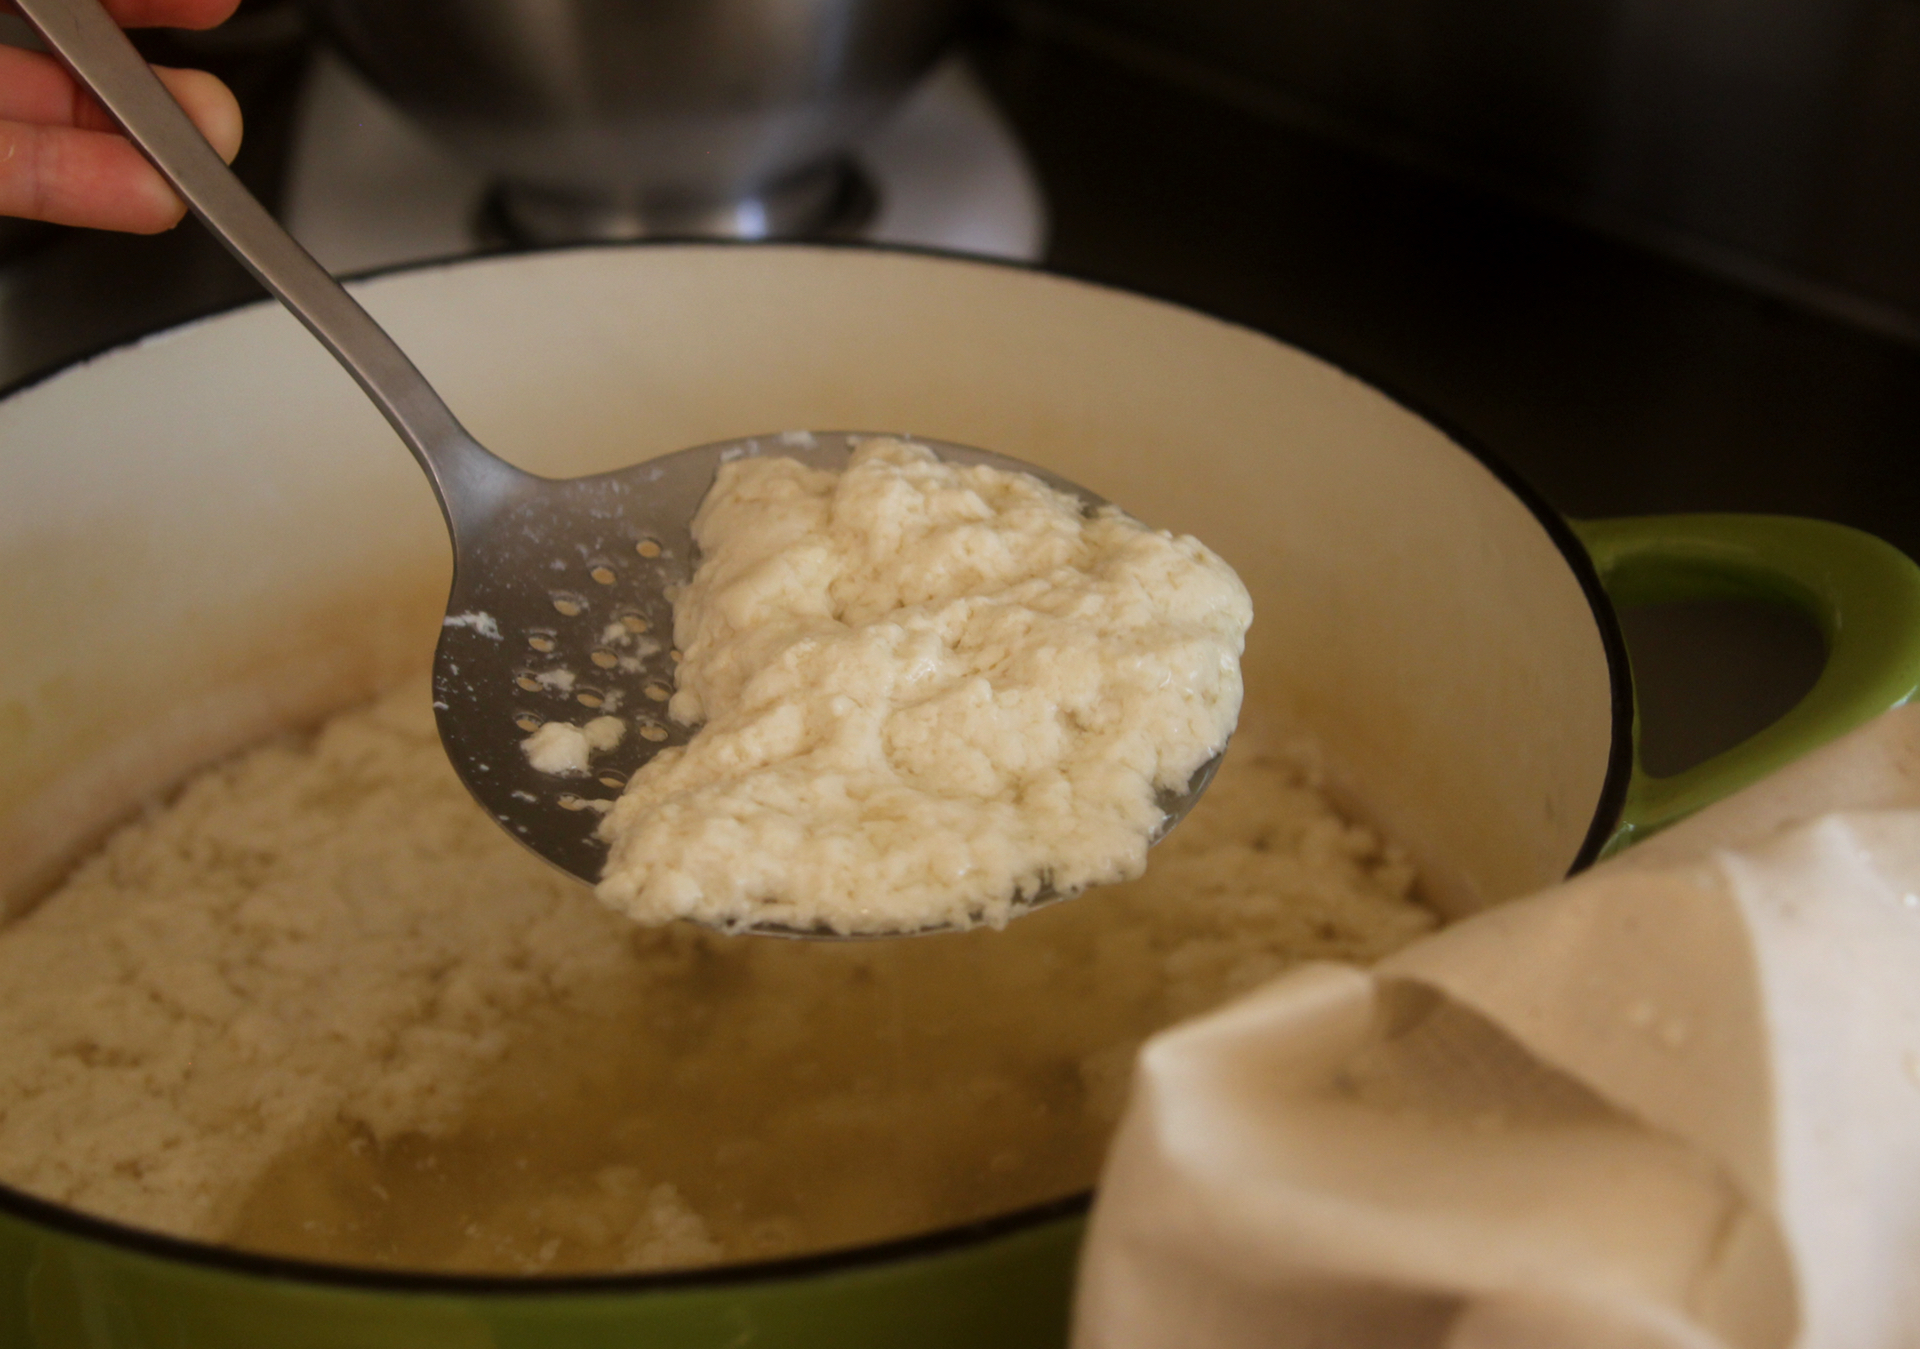 Try to keep the curds in large pieces as you transfer them to the mold.